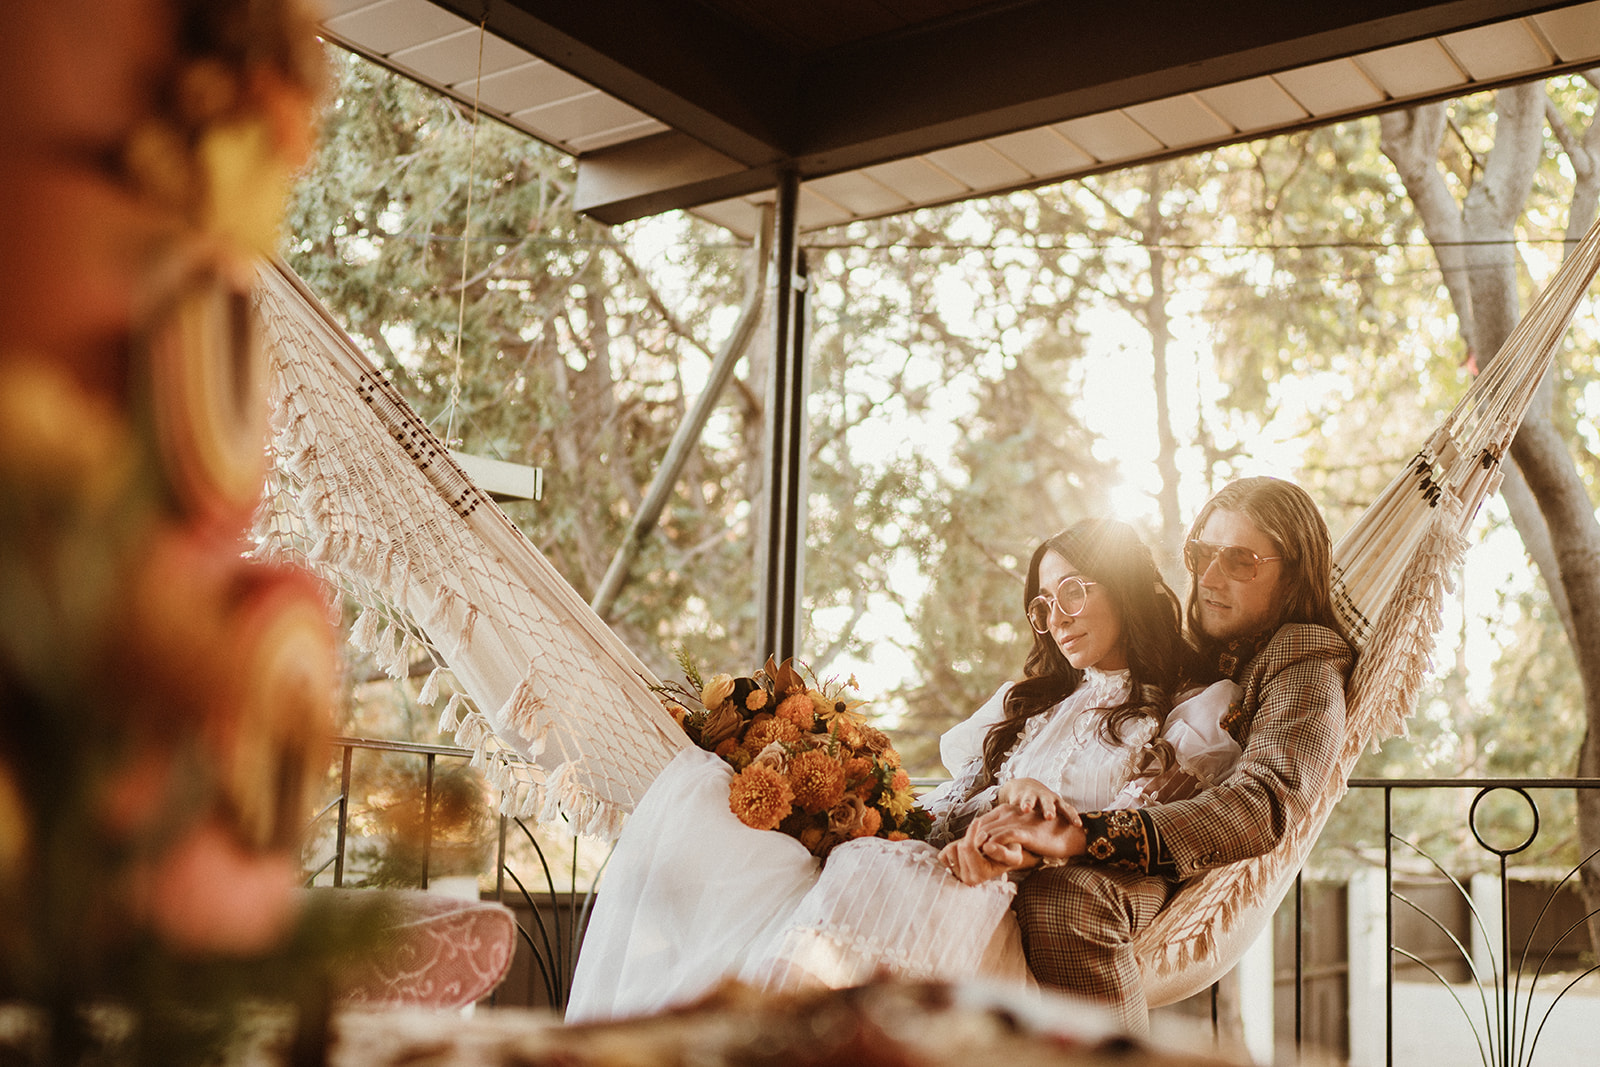 70's inspired retro wedding couple swing on a macrame hammock in a screened in porch on their wedding day for a 70's Backyard Wedding Inspiration